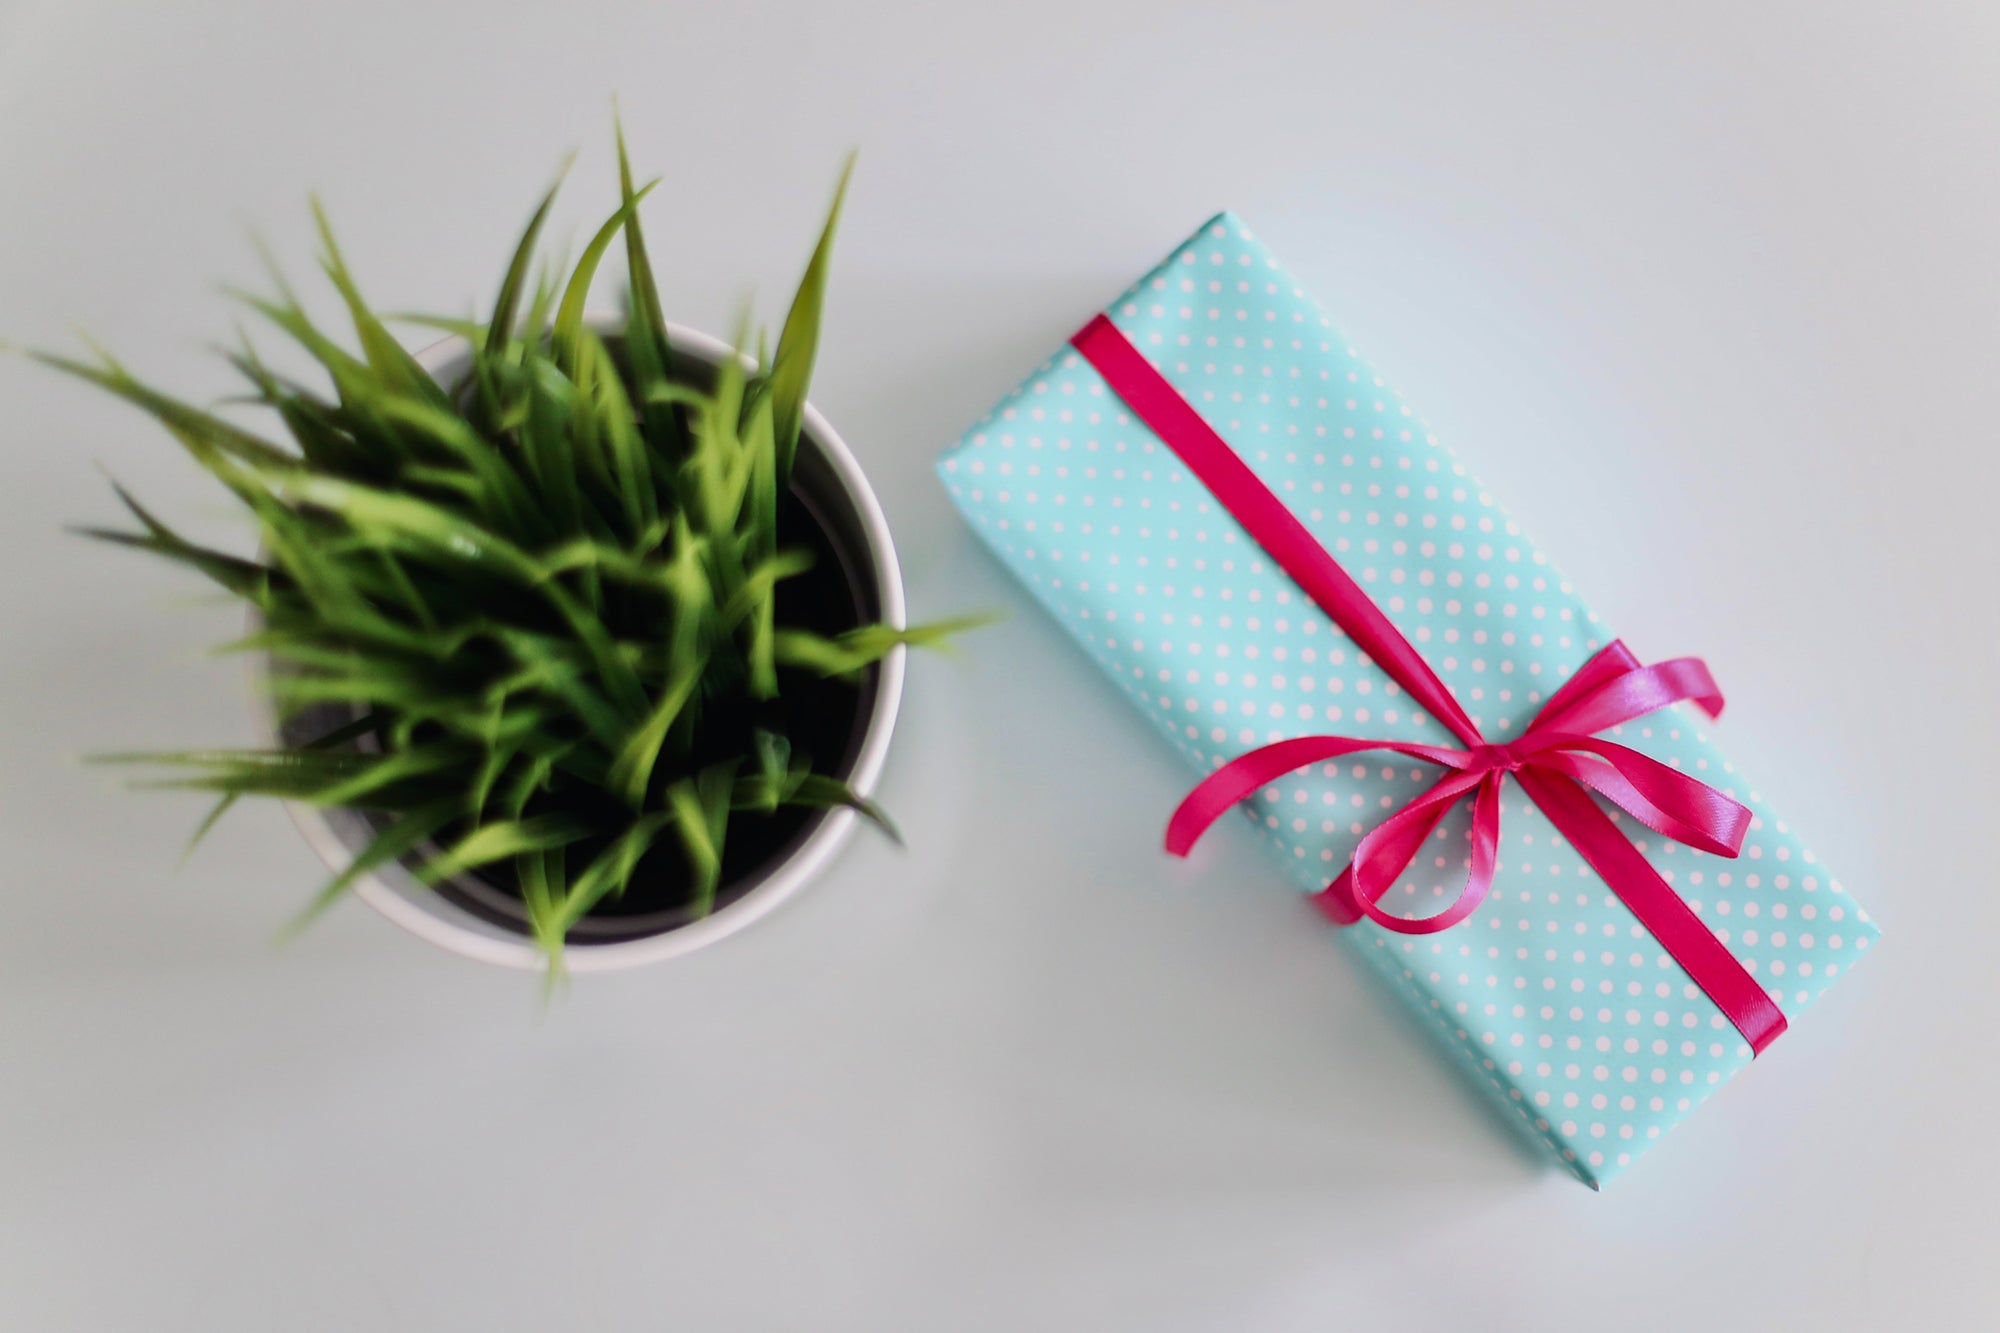 Best Gifts for Women: Amazing Birthday Gift Ideas for Her | Popular Science